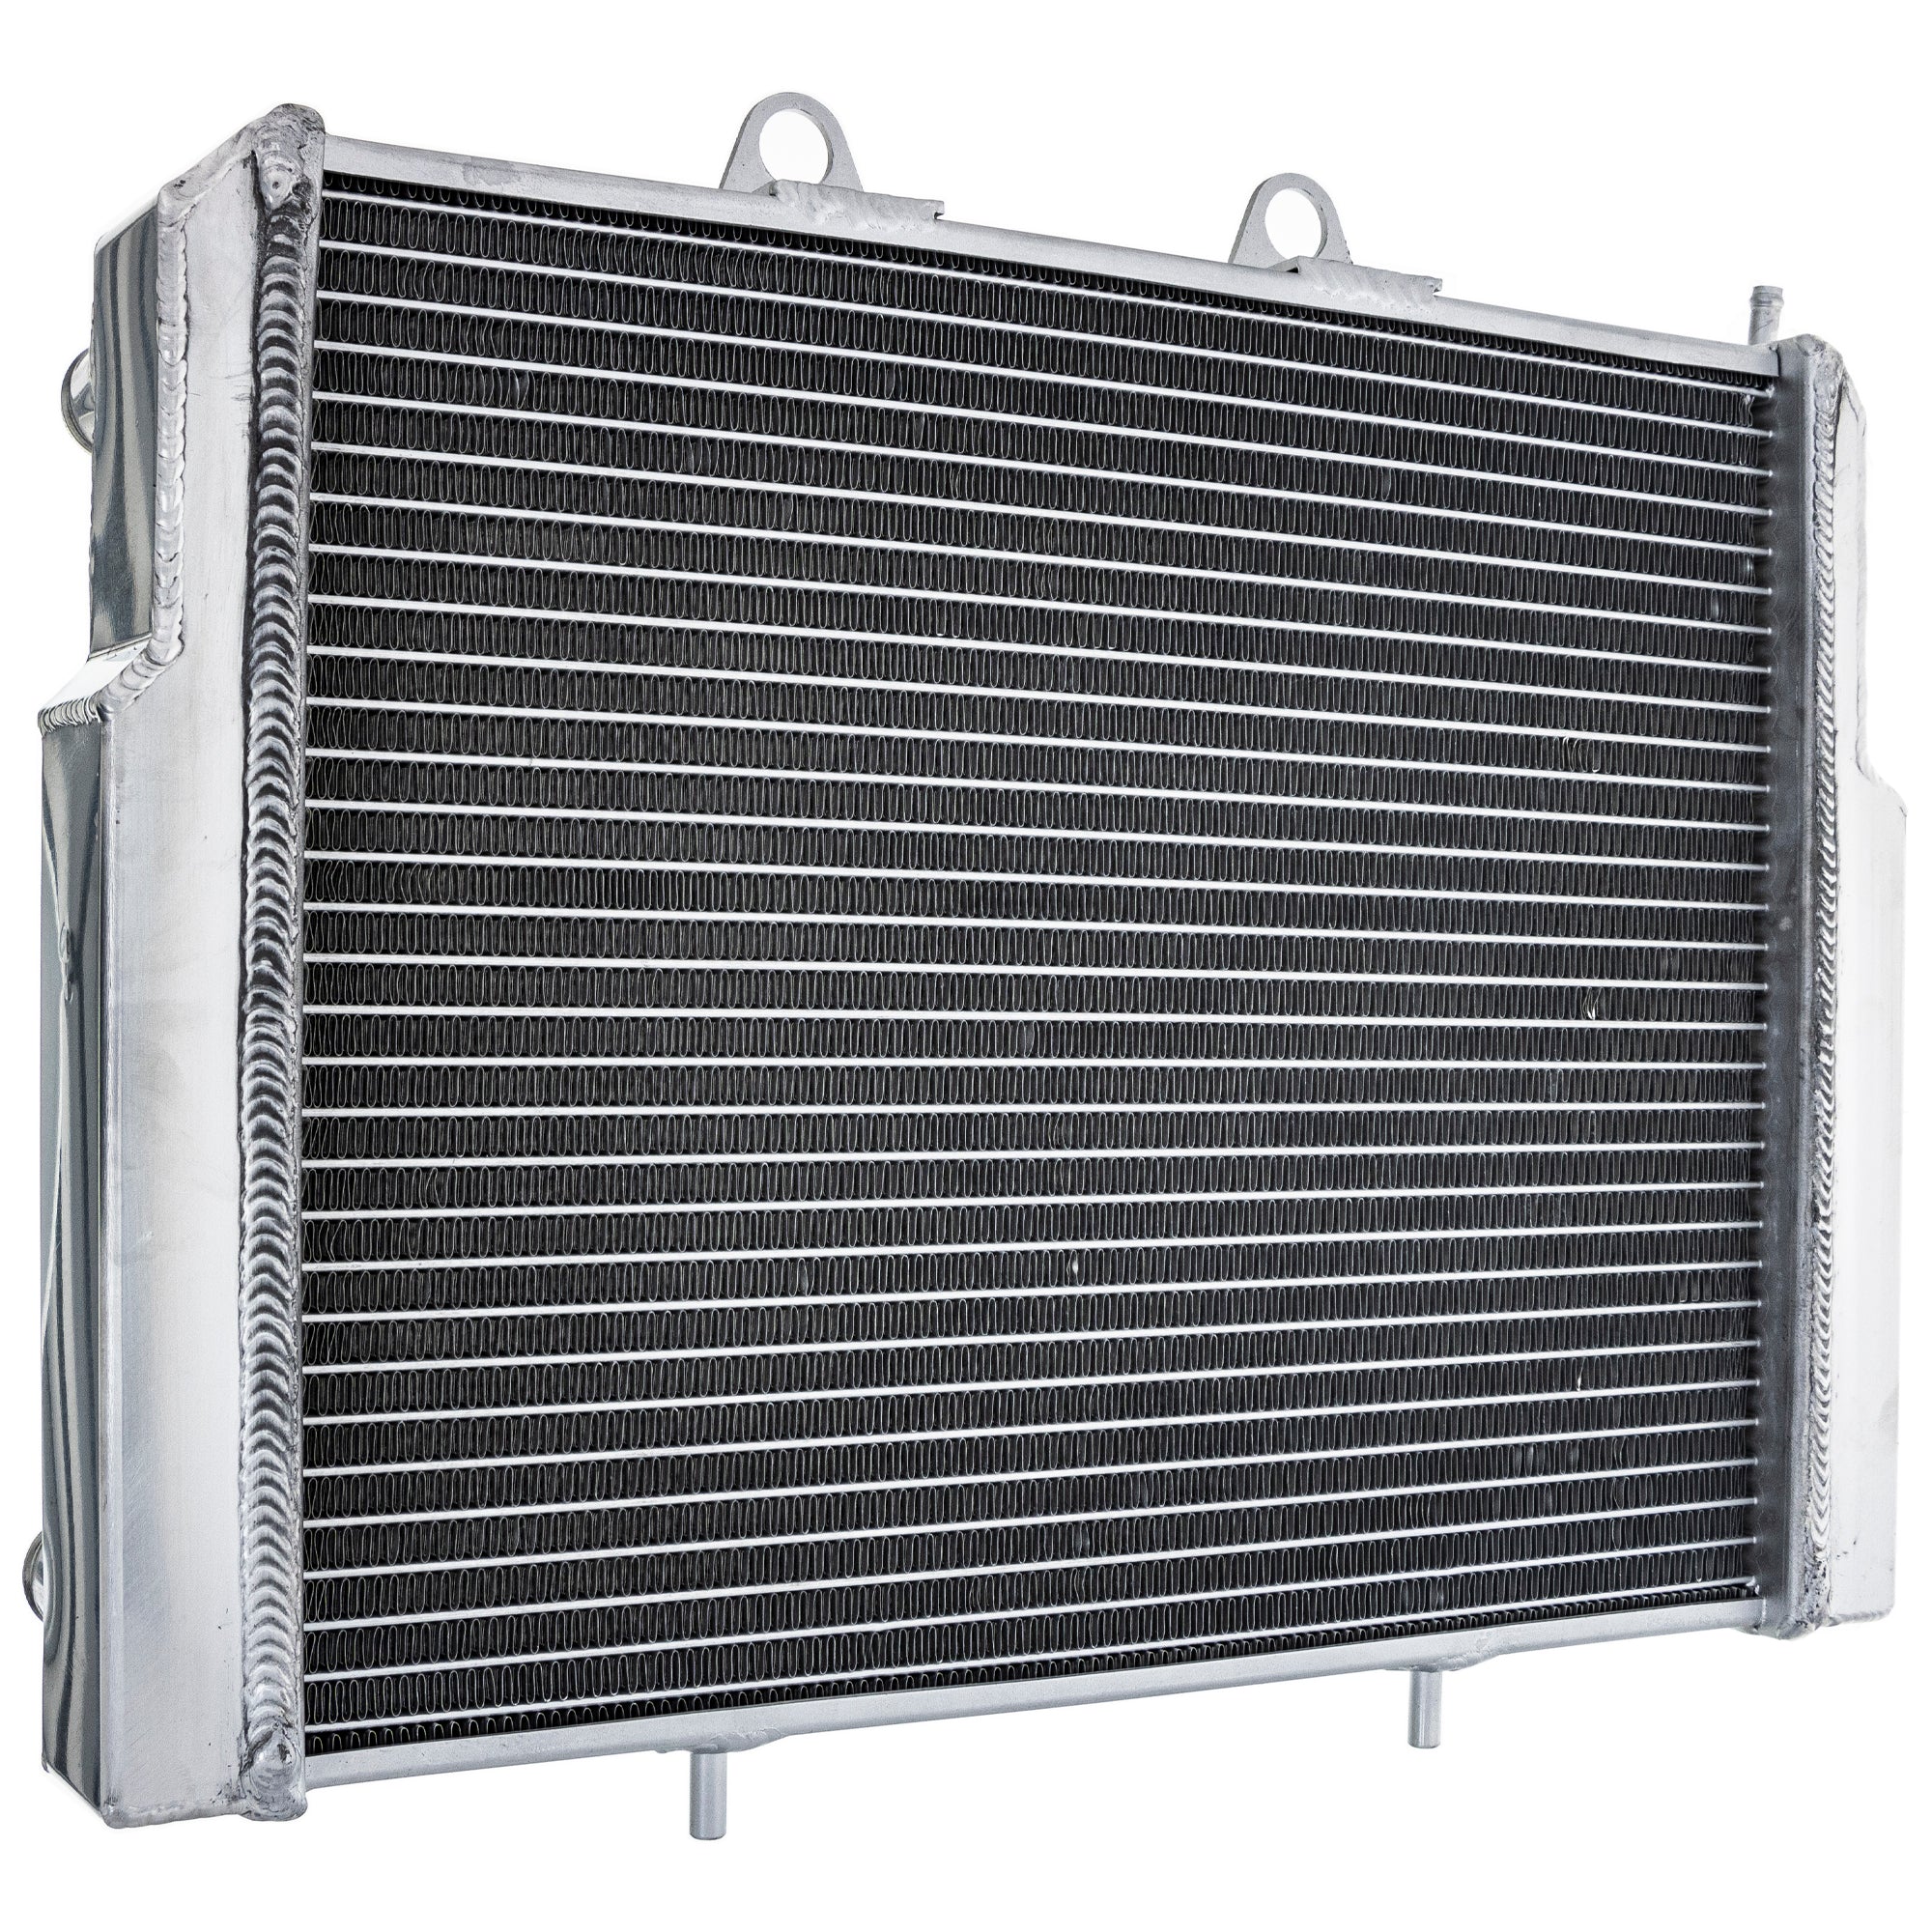 NICHE 519-CRD2244A High Capacity Radiator for zOTHER Polaris RZR ACE